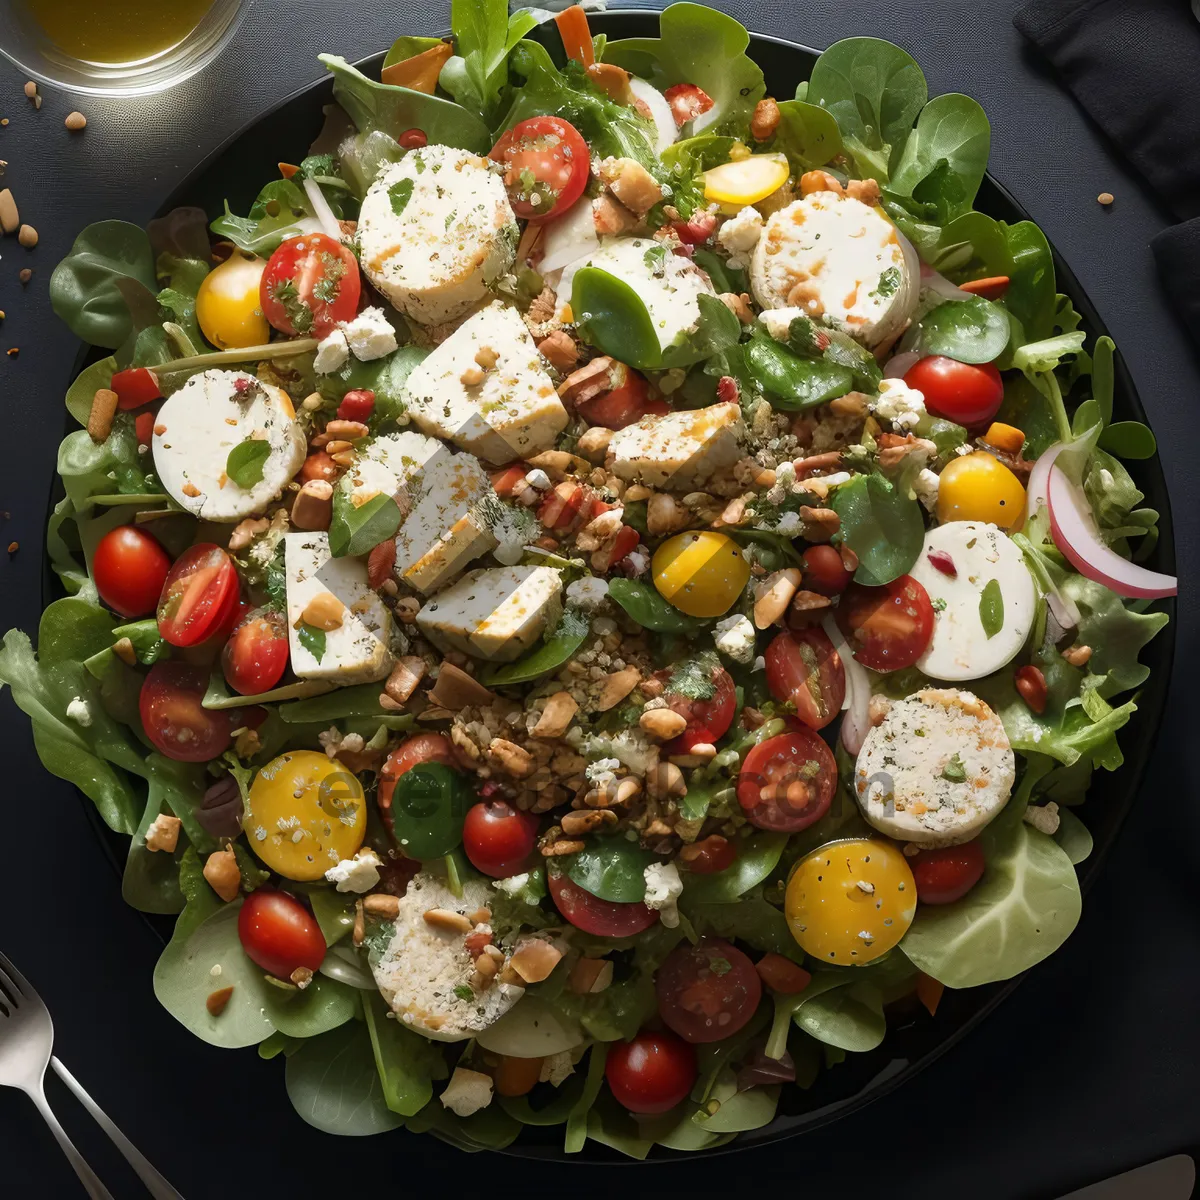 Picture of Delicious Grilled Vegetable Salad with Olive Dressing